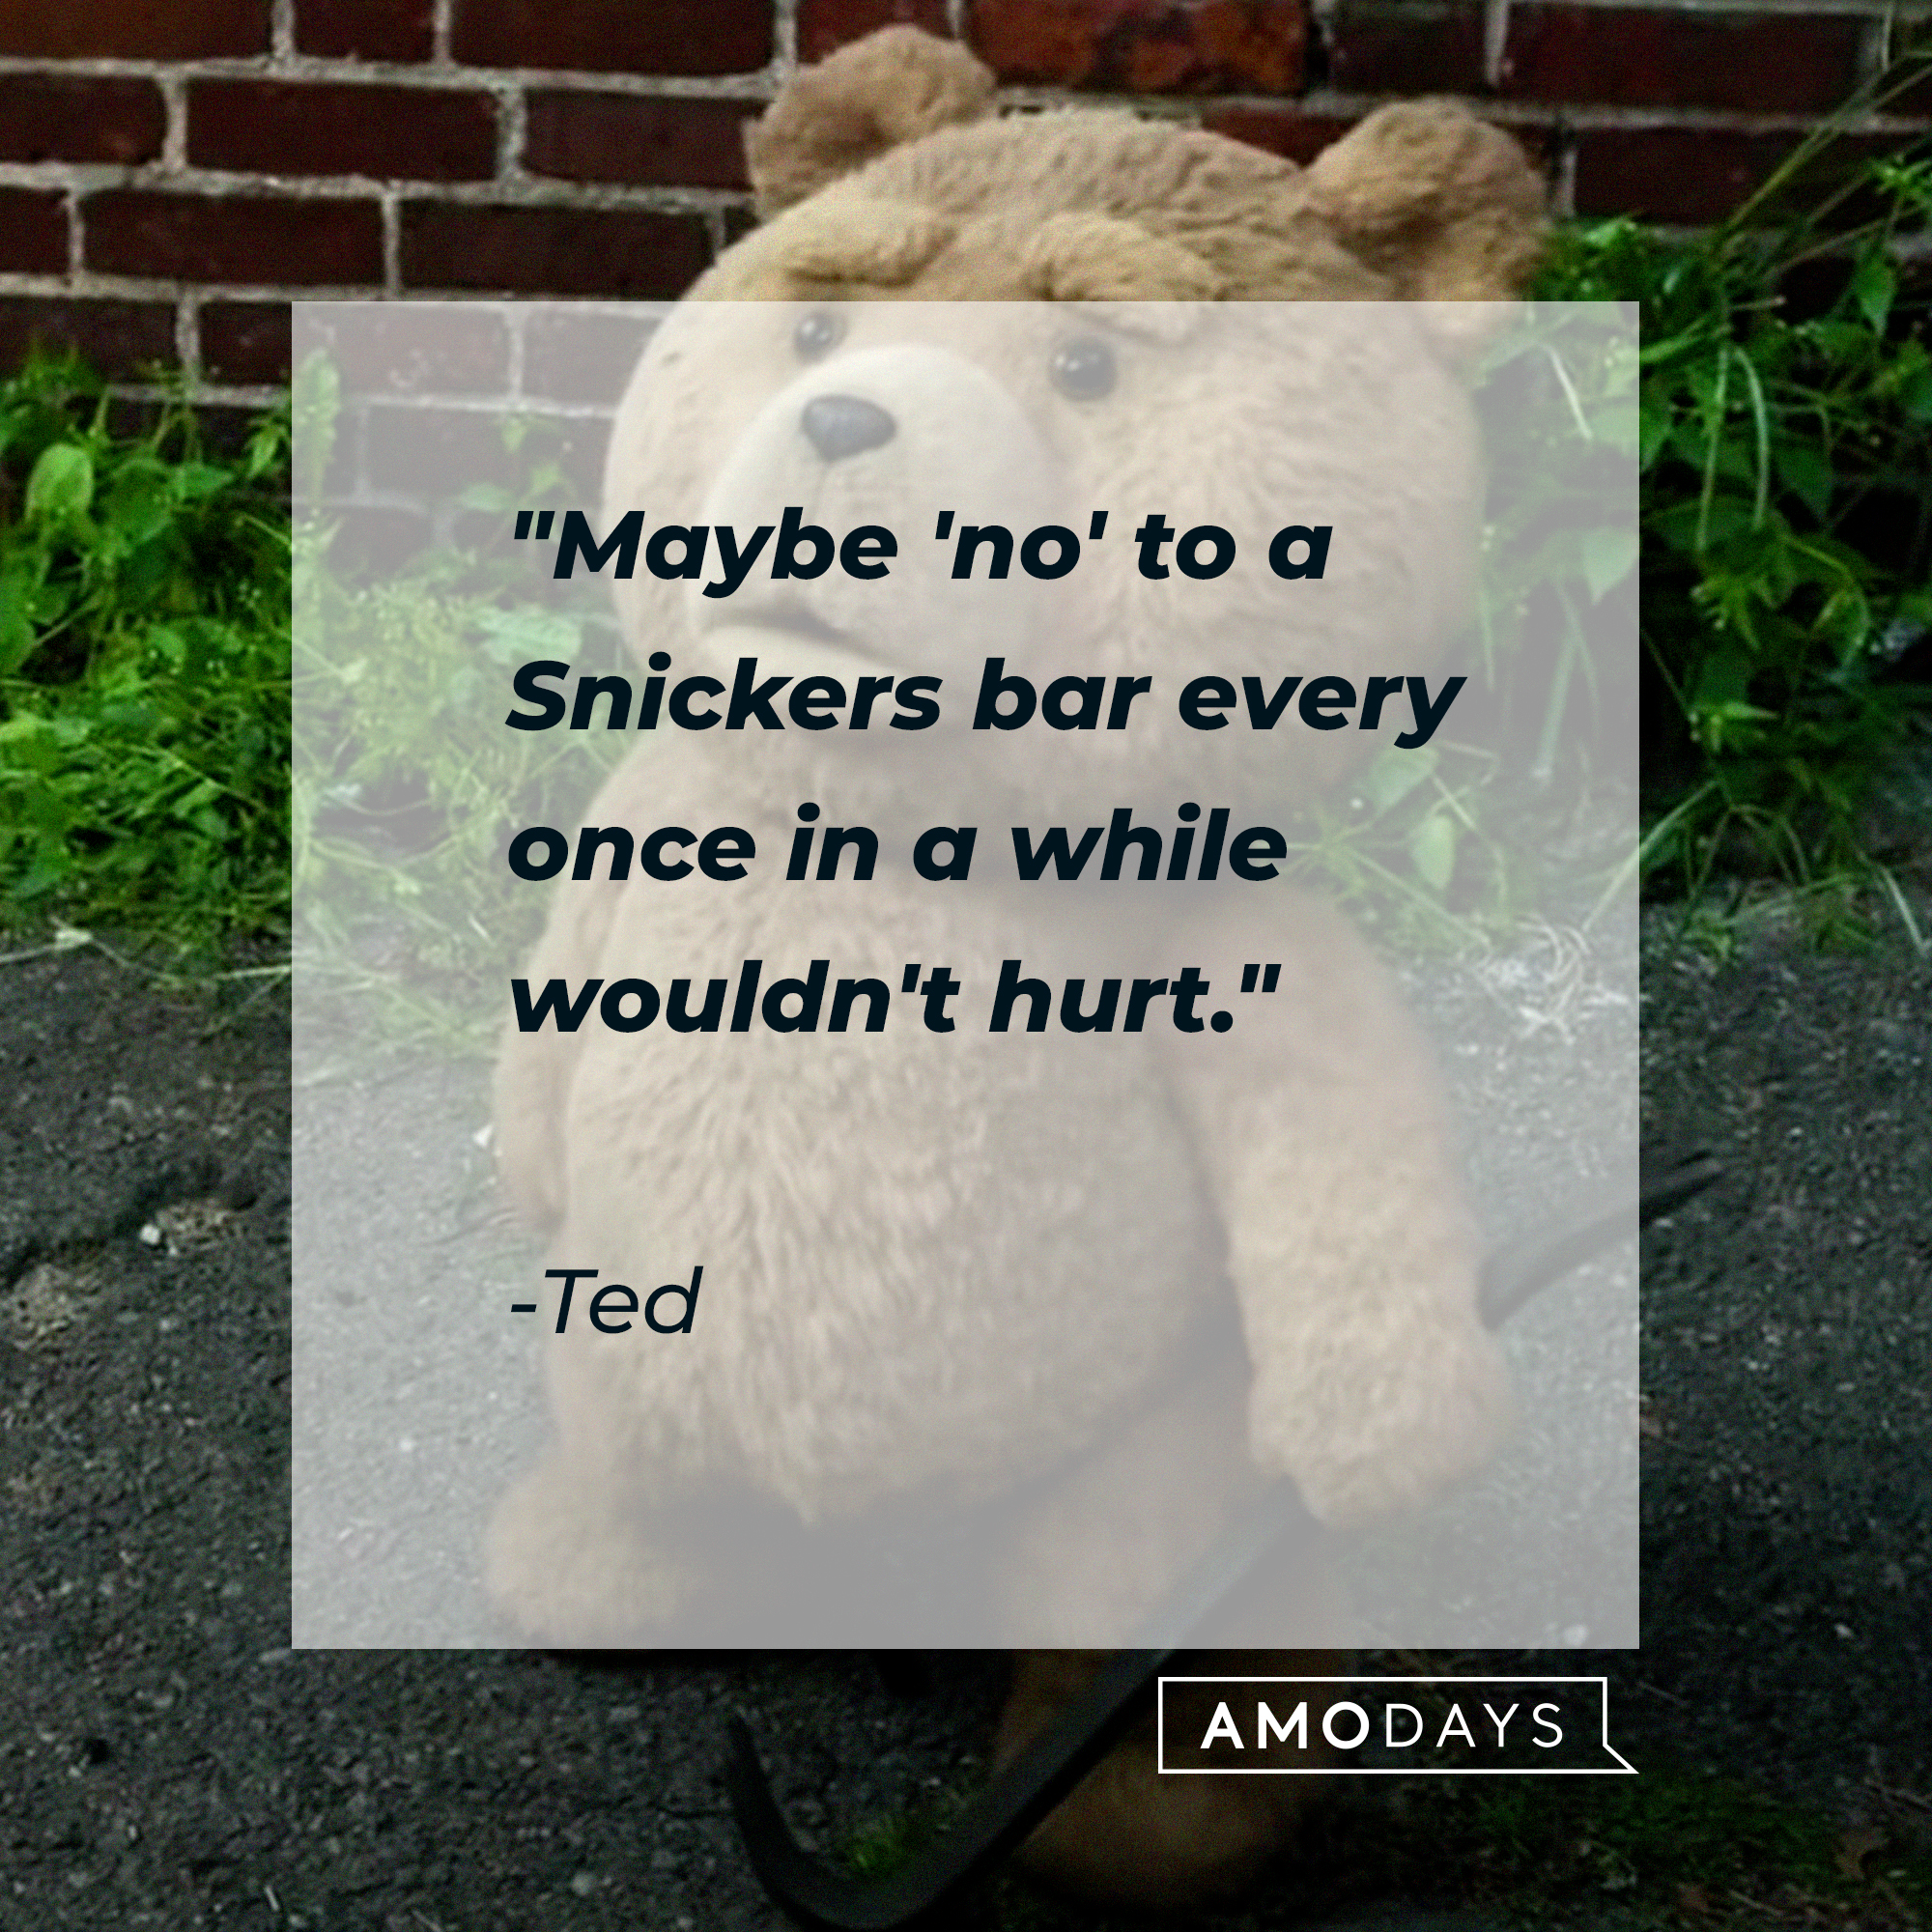 Ted's quote: "Maybe 'no' to a Snickers bar every once in a while wouldn't hurt." | Source: facebook.com/tedisreal